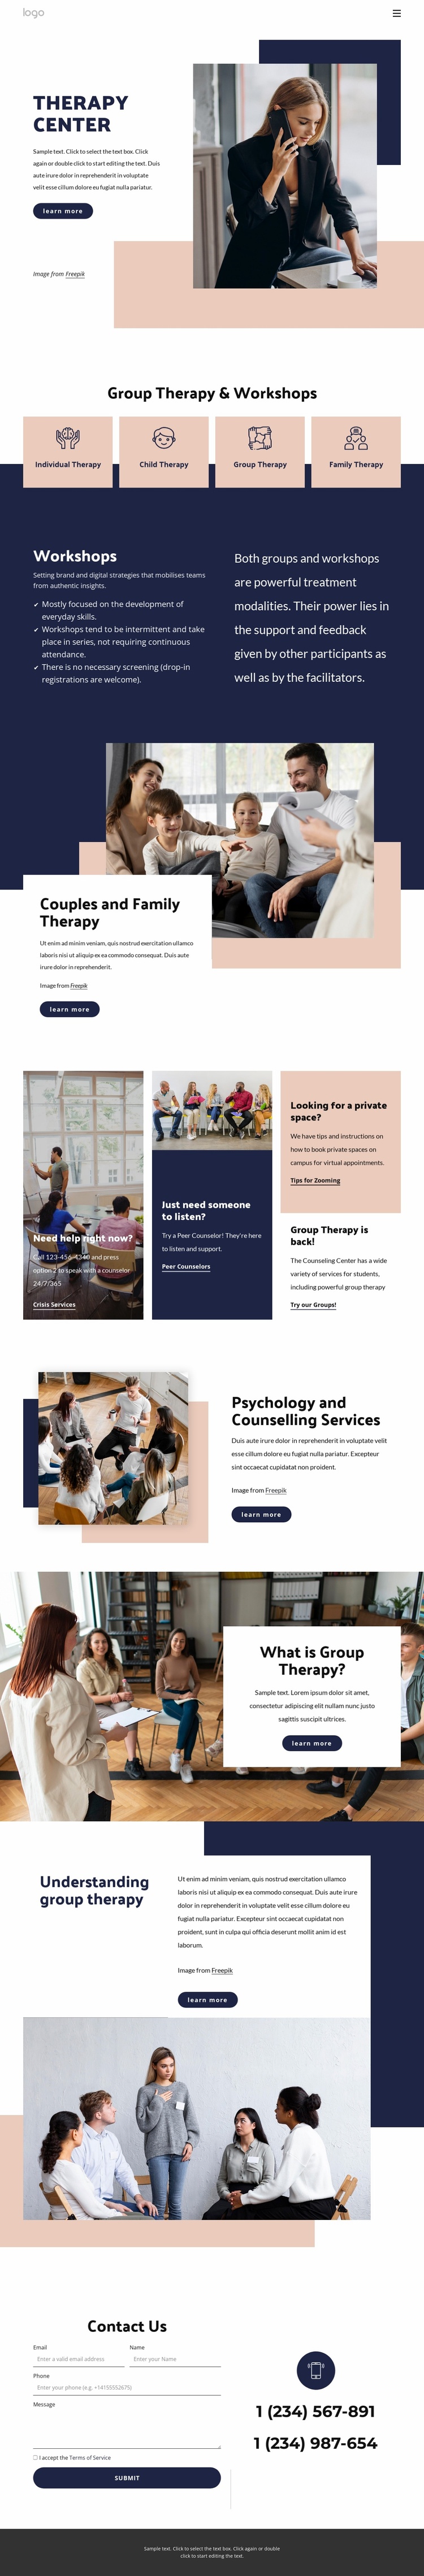 Therapy center Landing Page